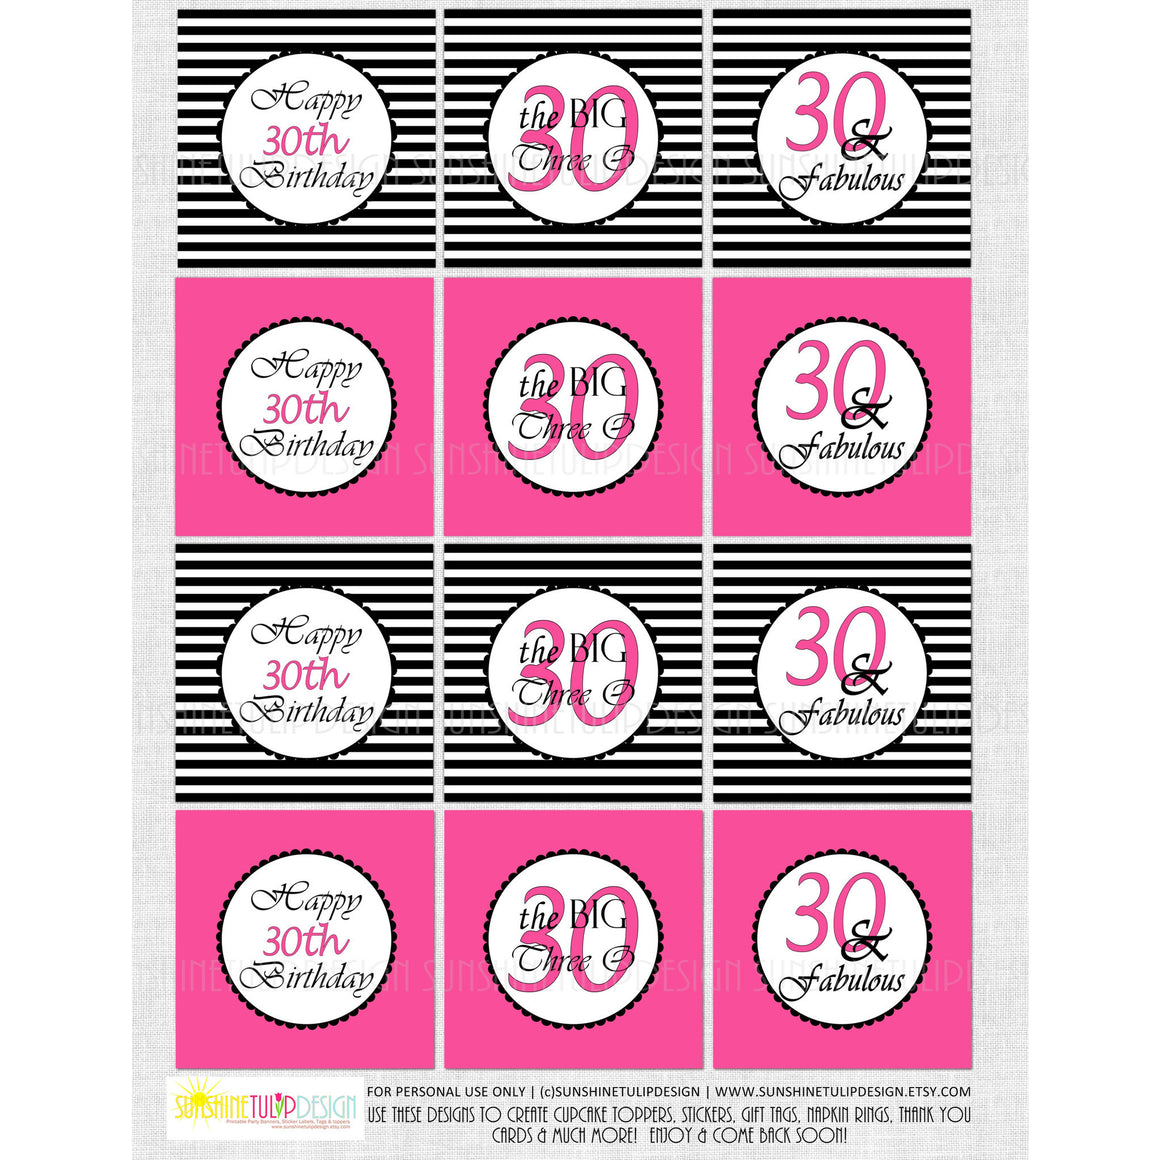 Printable 30th Birthday Hot Pink & Stripe Cupcake Toppers, Sticker Labels & Party Favor Tags - Sunshinetulipdesign